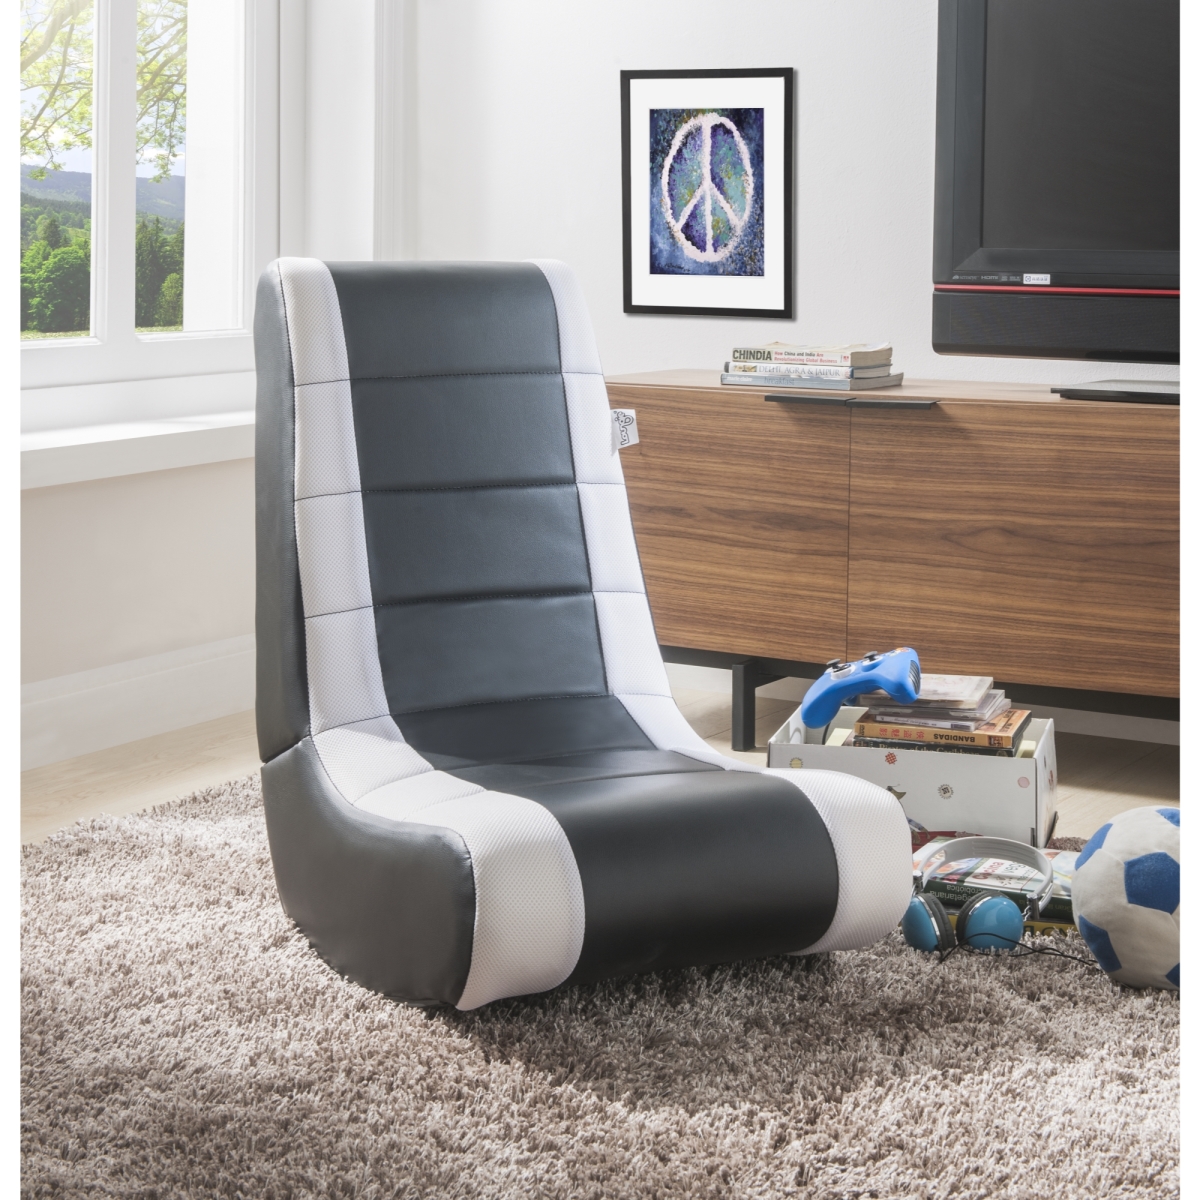 Rockme Video Gaming Rocker Chair For Kids Teens Adults & Boys Or Girls - Black With White